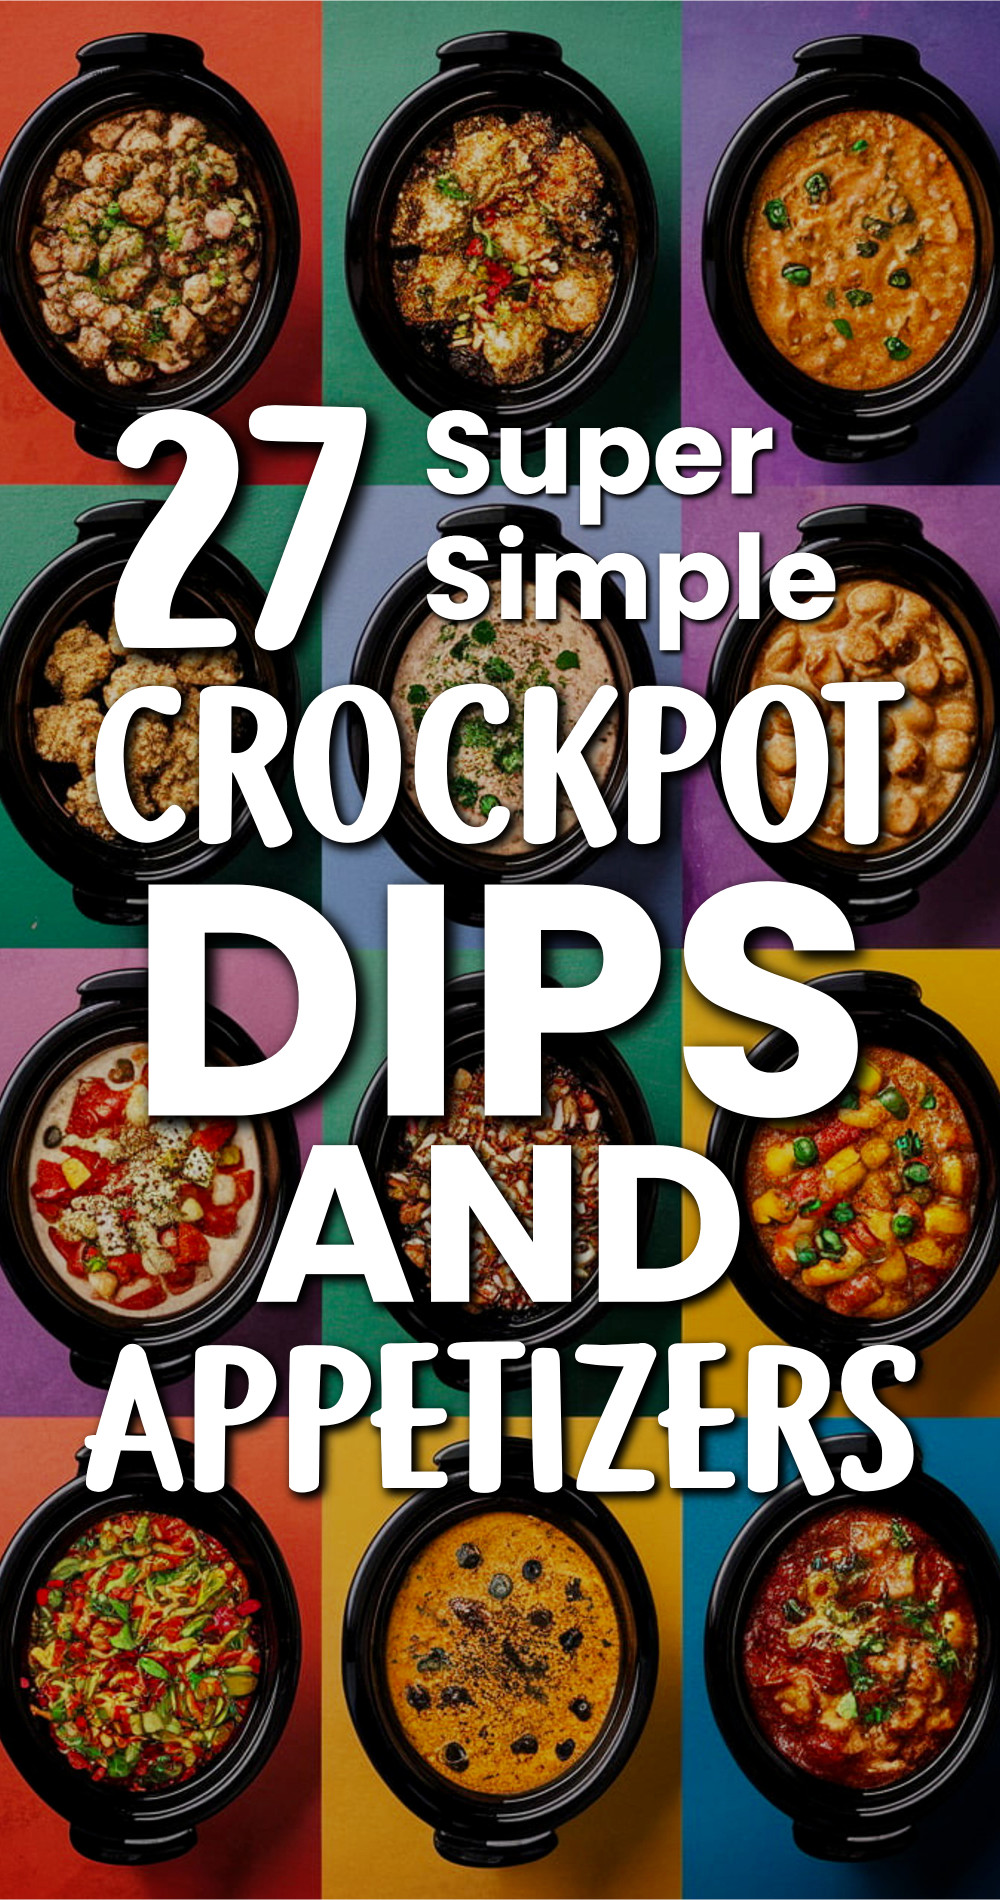 27 Super Simple Crockpot Dips and Appetizers